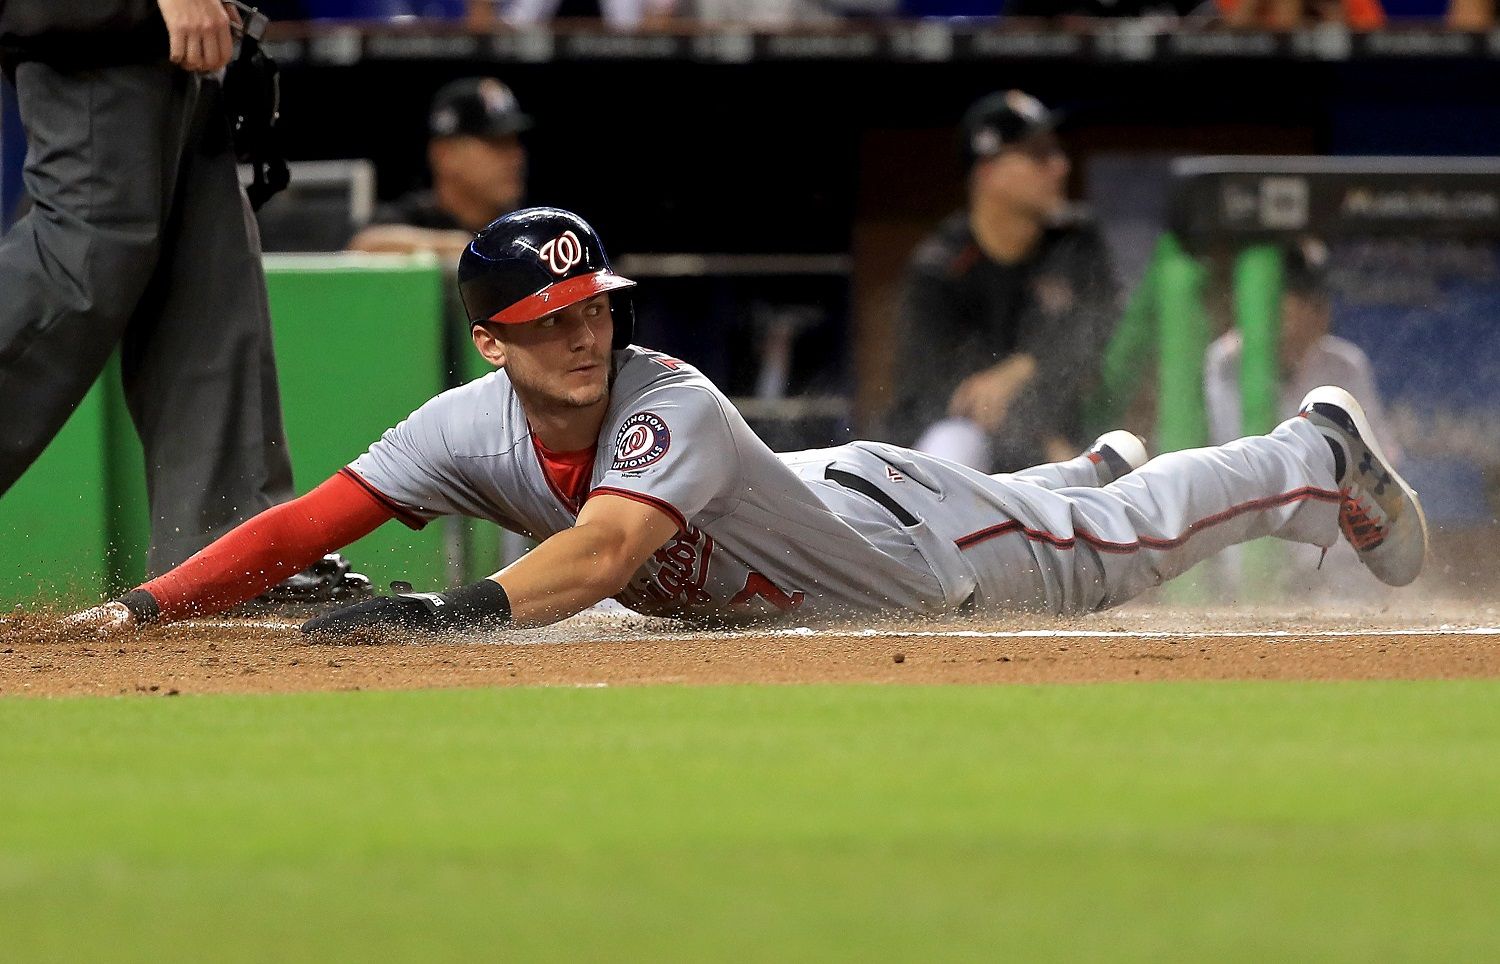 MIAMI, FL - SEPTEMBER 06:  Trea Turner #7 of the Washington Nationals slides home in the first inning during a game against the Miami Marlins at Marlins Park on September 6, 2017 in Miami, Florida.  (Photo by Mike Ehrmann/Getty Images)